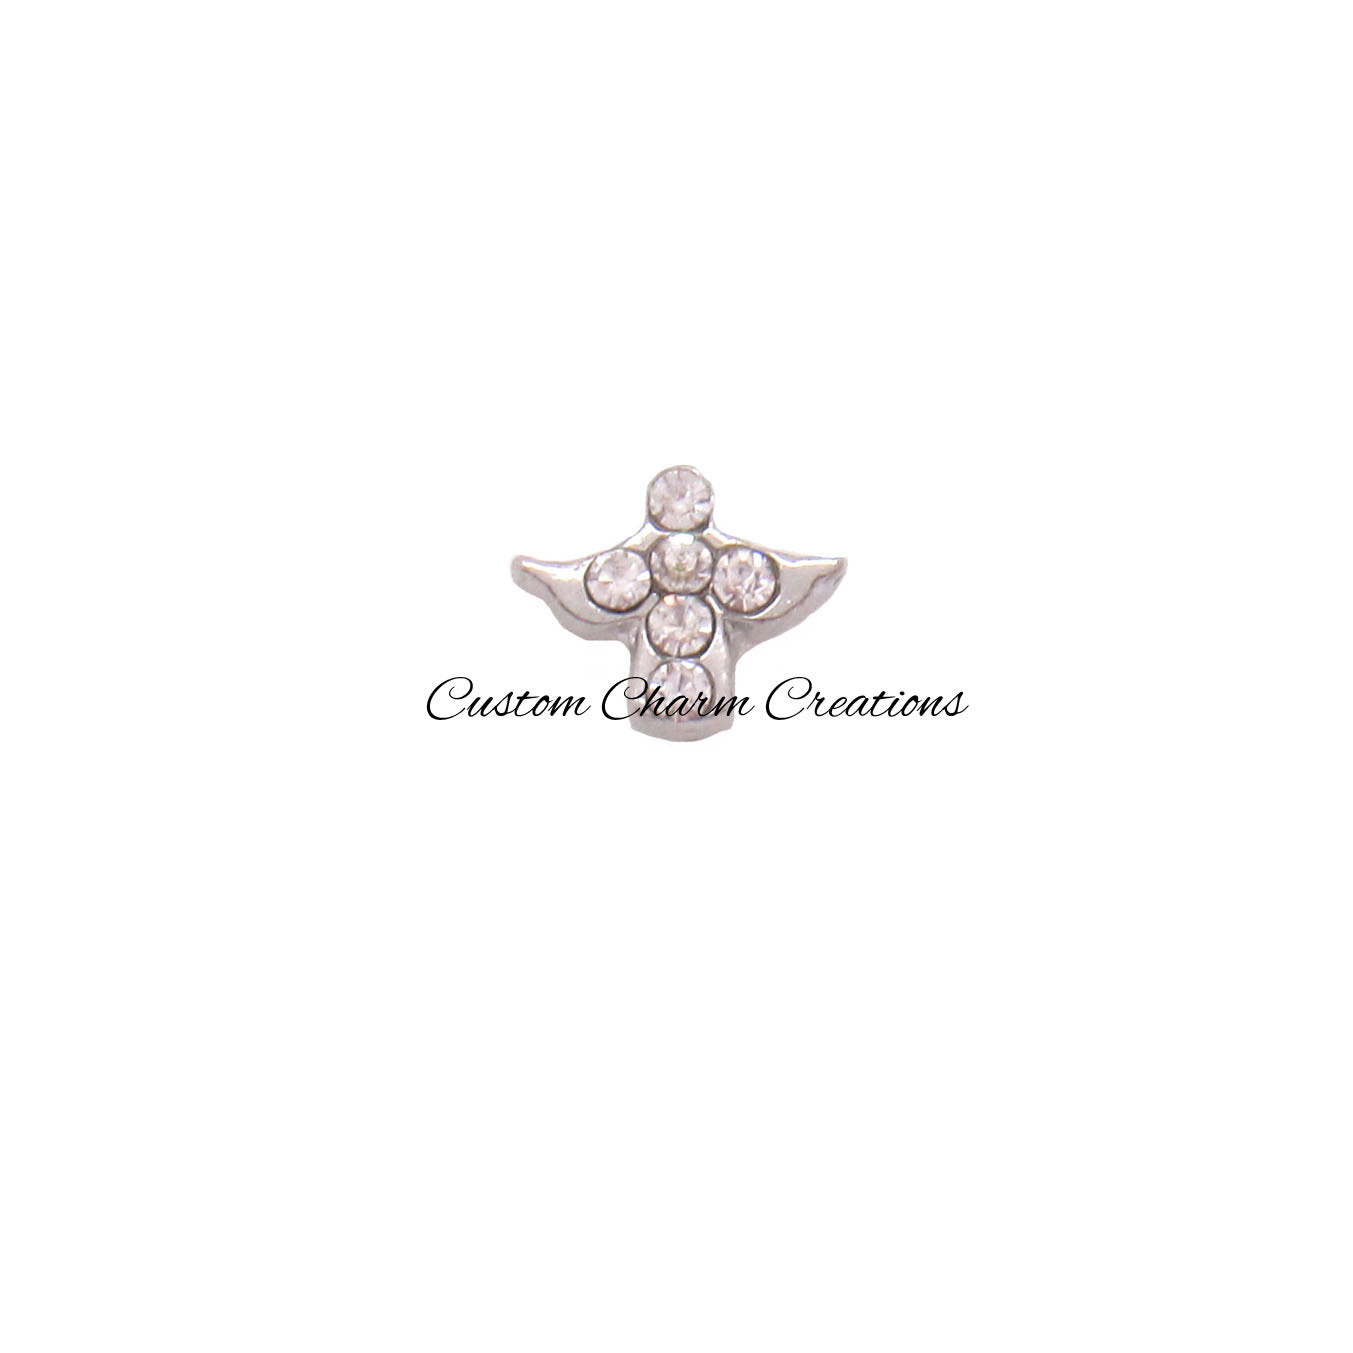 Silver Angel with Crystals Floating Locket Charm - Custom Charm Creations